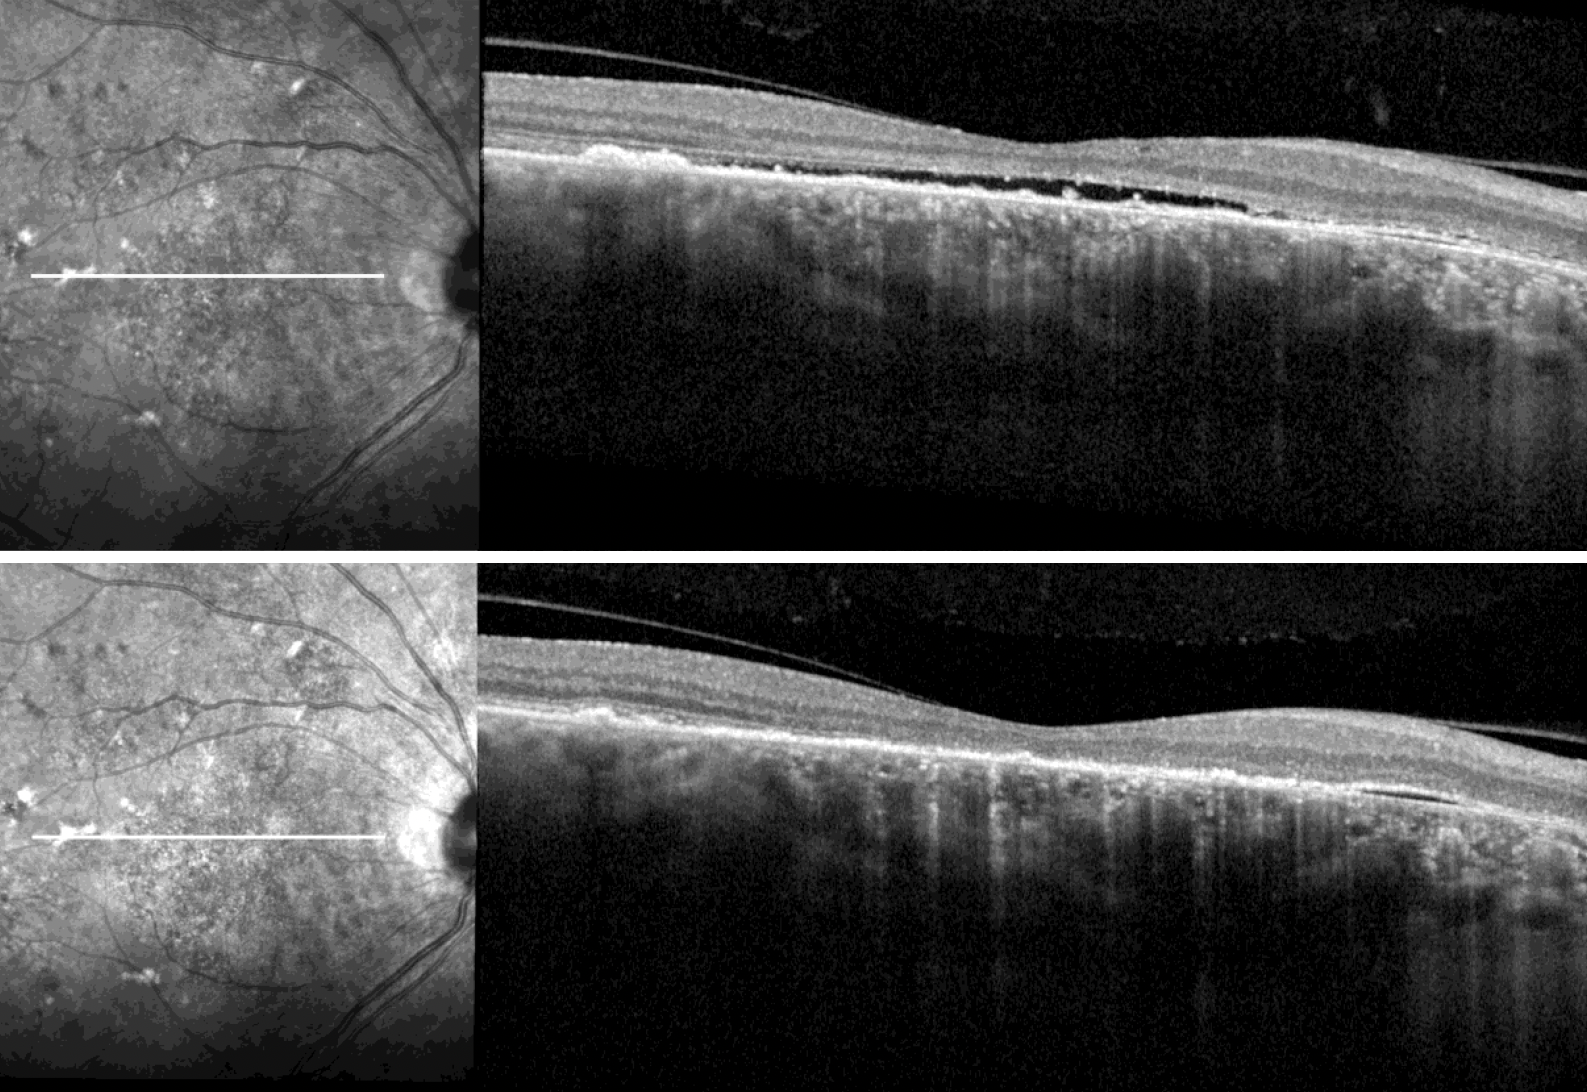 These photos from one subject in the study with chronic CSC show flat subfoveal subretinal fluid at baseline (top) and resolution following treatment with prednisolone eye drops for six weeks (bottom). Increased IOP could be one explanation for the observed reduction, the researchers suggest. 